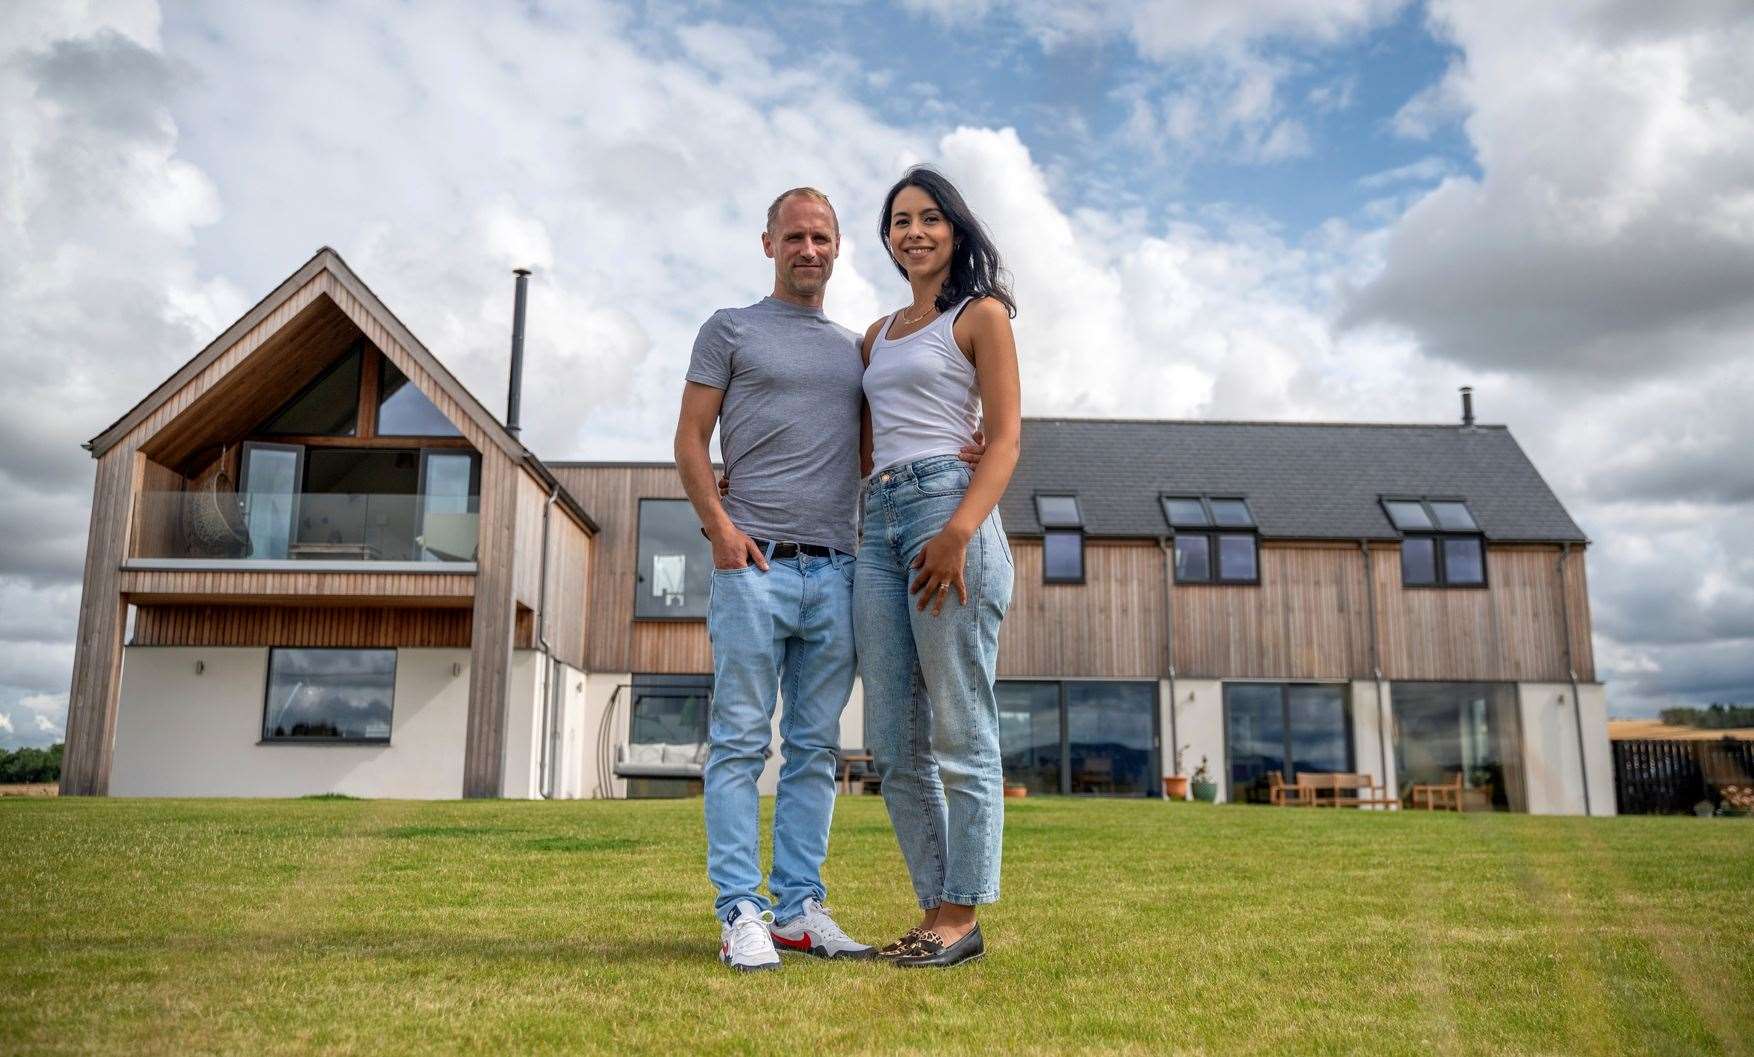 Homeowners Craig & Maria outside Casa Barra near Inverurie.,Casa Barra is a contemporary self-build barn-style dwelling situated on the site of a family farm. Home to Maria, Craig and their two children, Violeta and Matias, Casa Barra fits in with the rural landscape, making the most of the impressive views which surround. Picture: IWC Media,Michael Traill